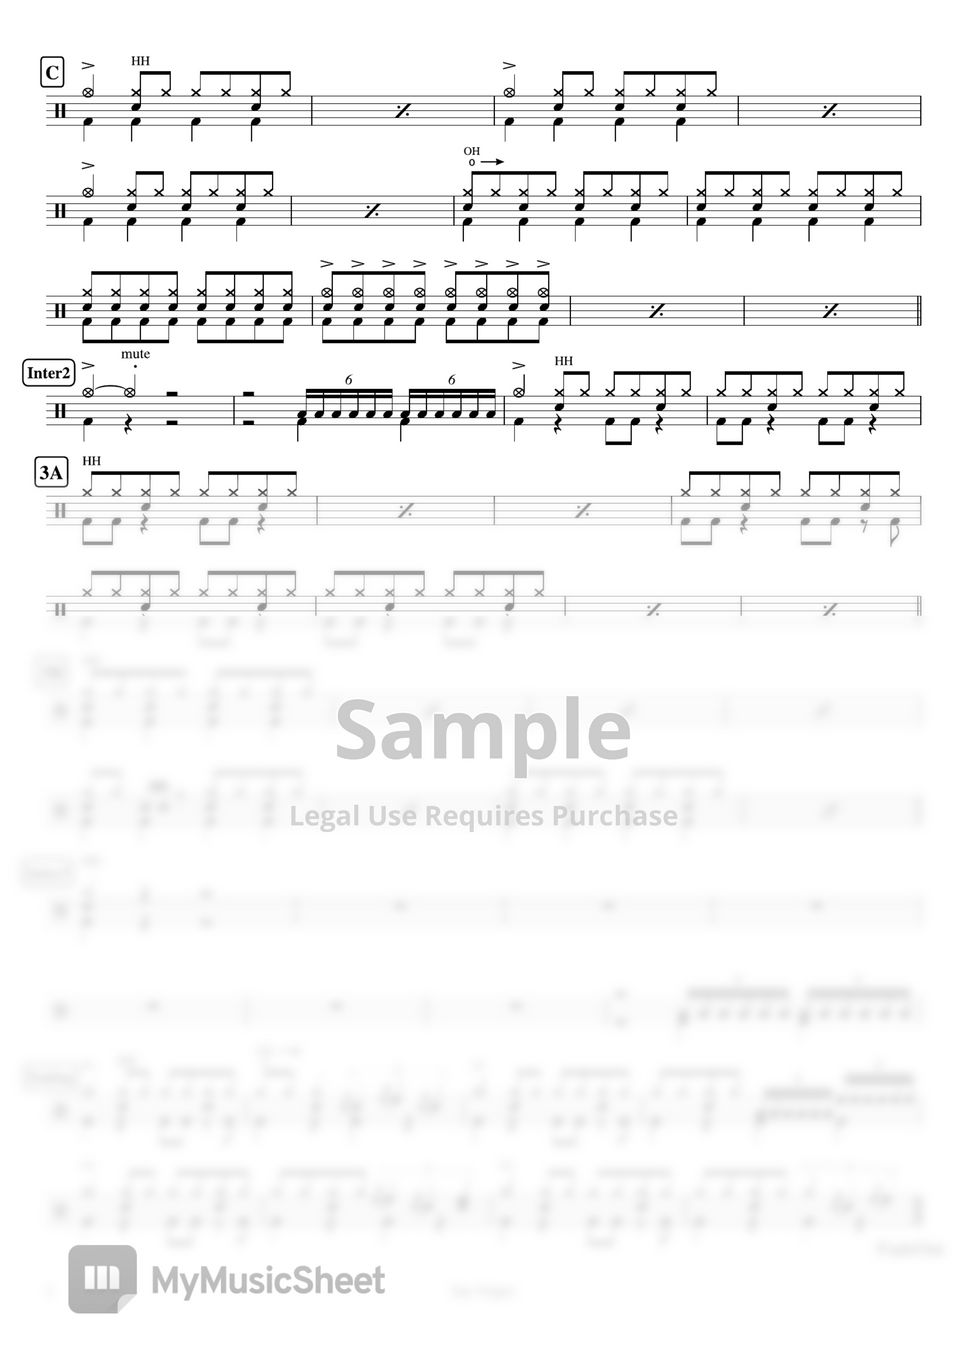 The Beatles - Day Tripper by Cookai's J-pop Drum sheet music!!!